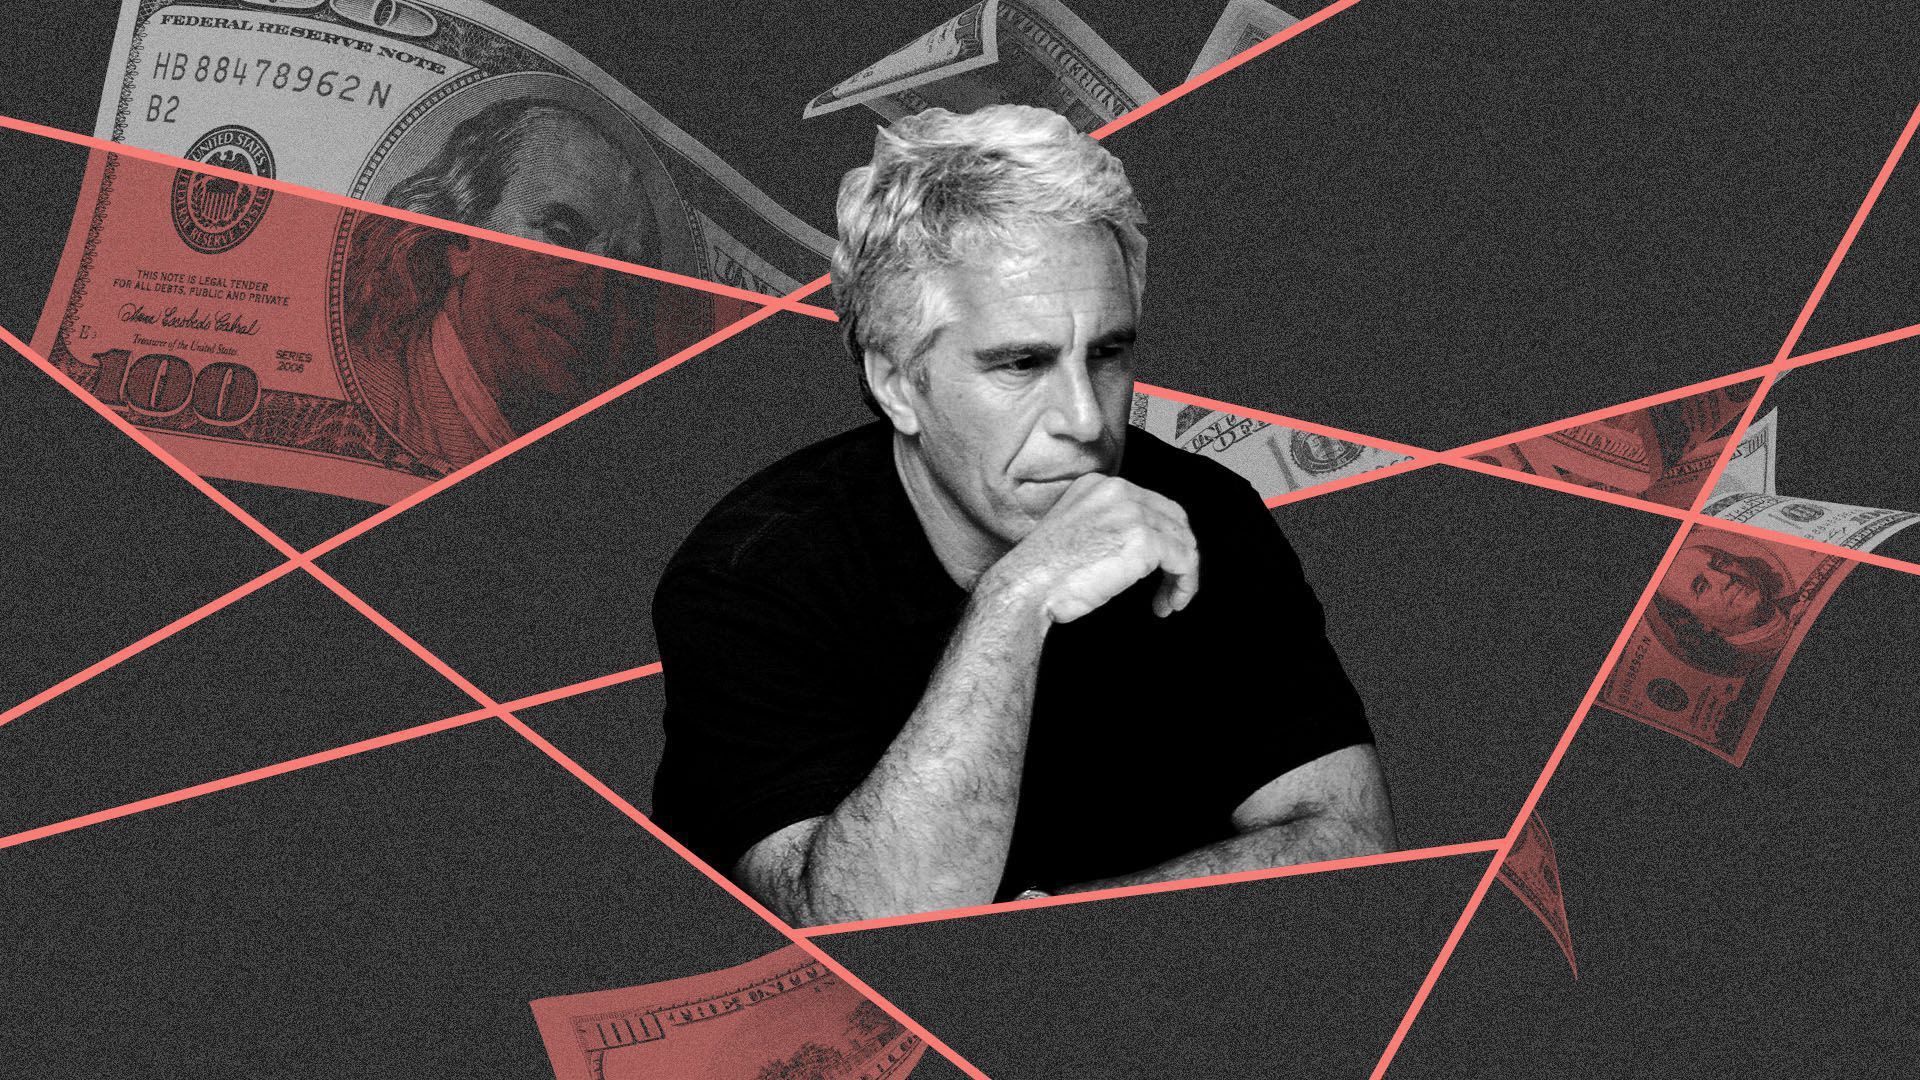 Illustration of Jeffery Epstein with money in the background